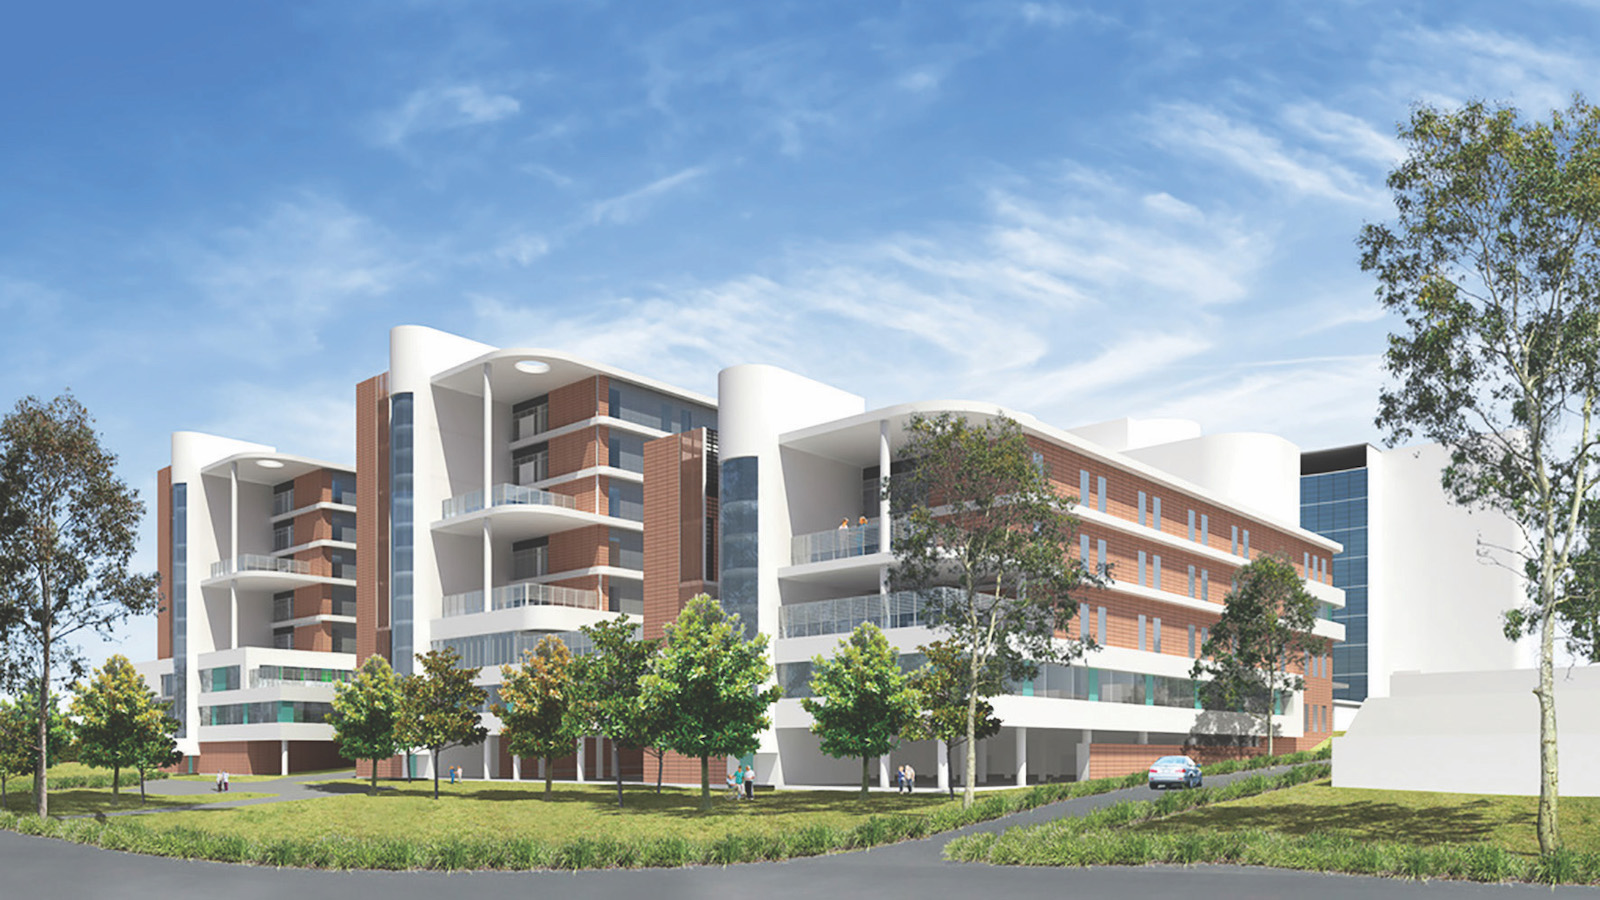 The Concord hospital redevelopment is being delivered with a strict five-day week